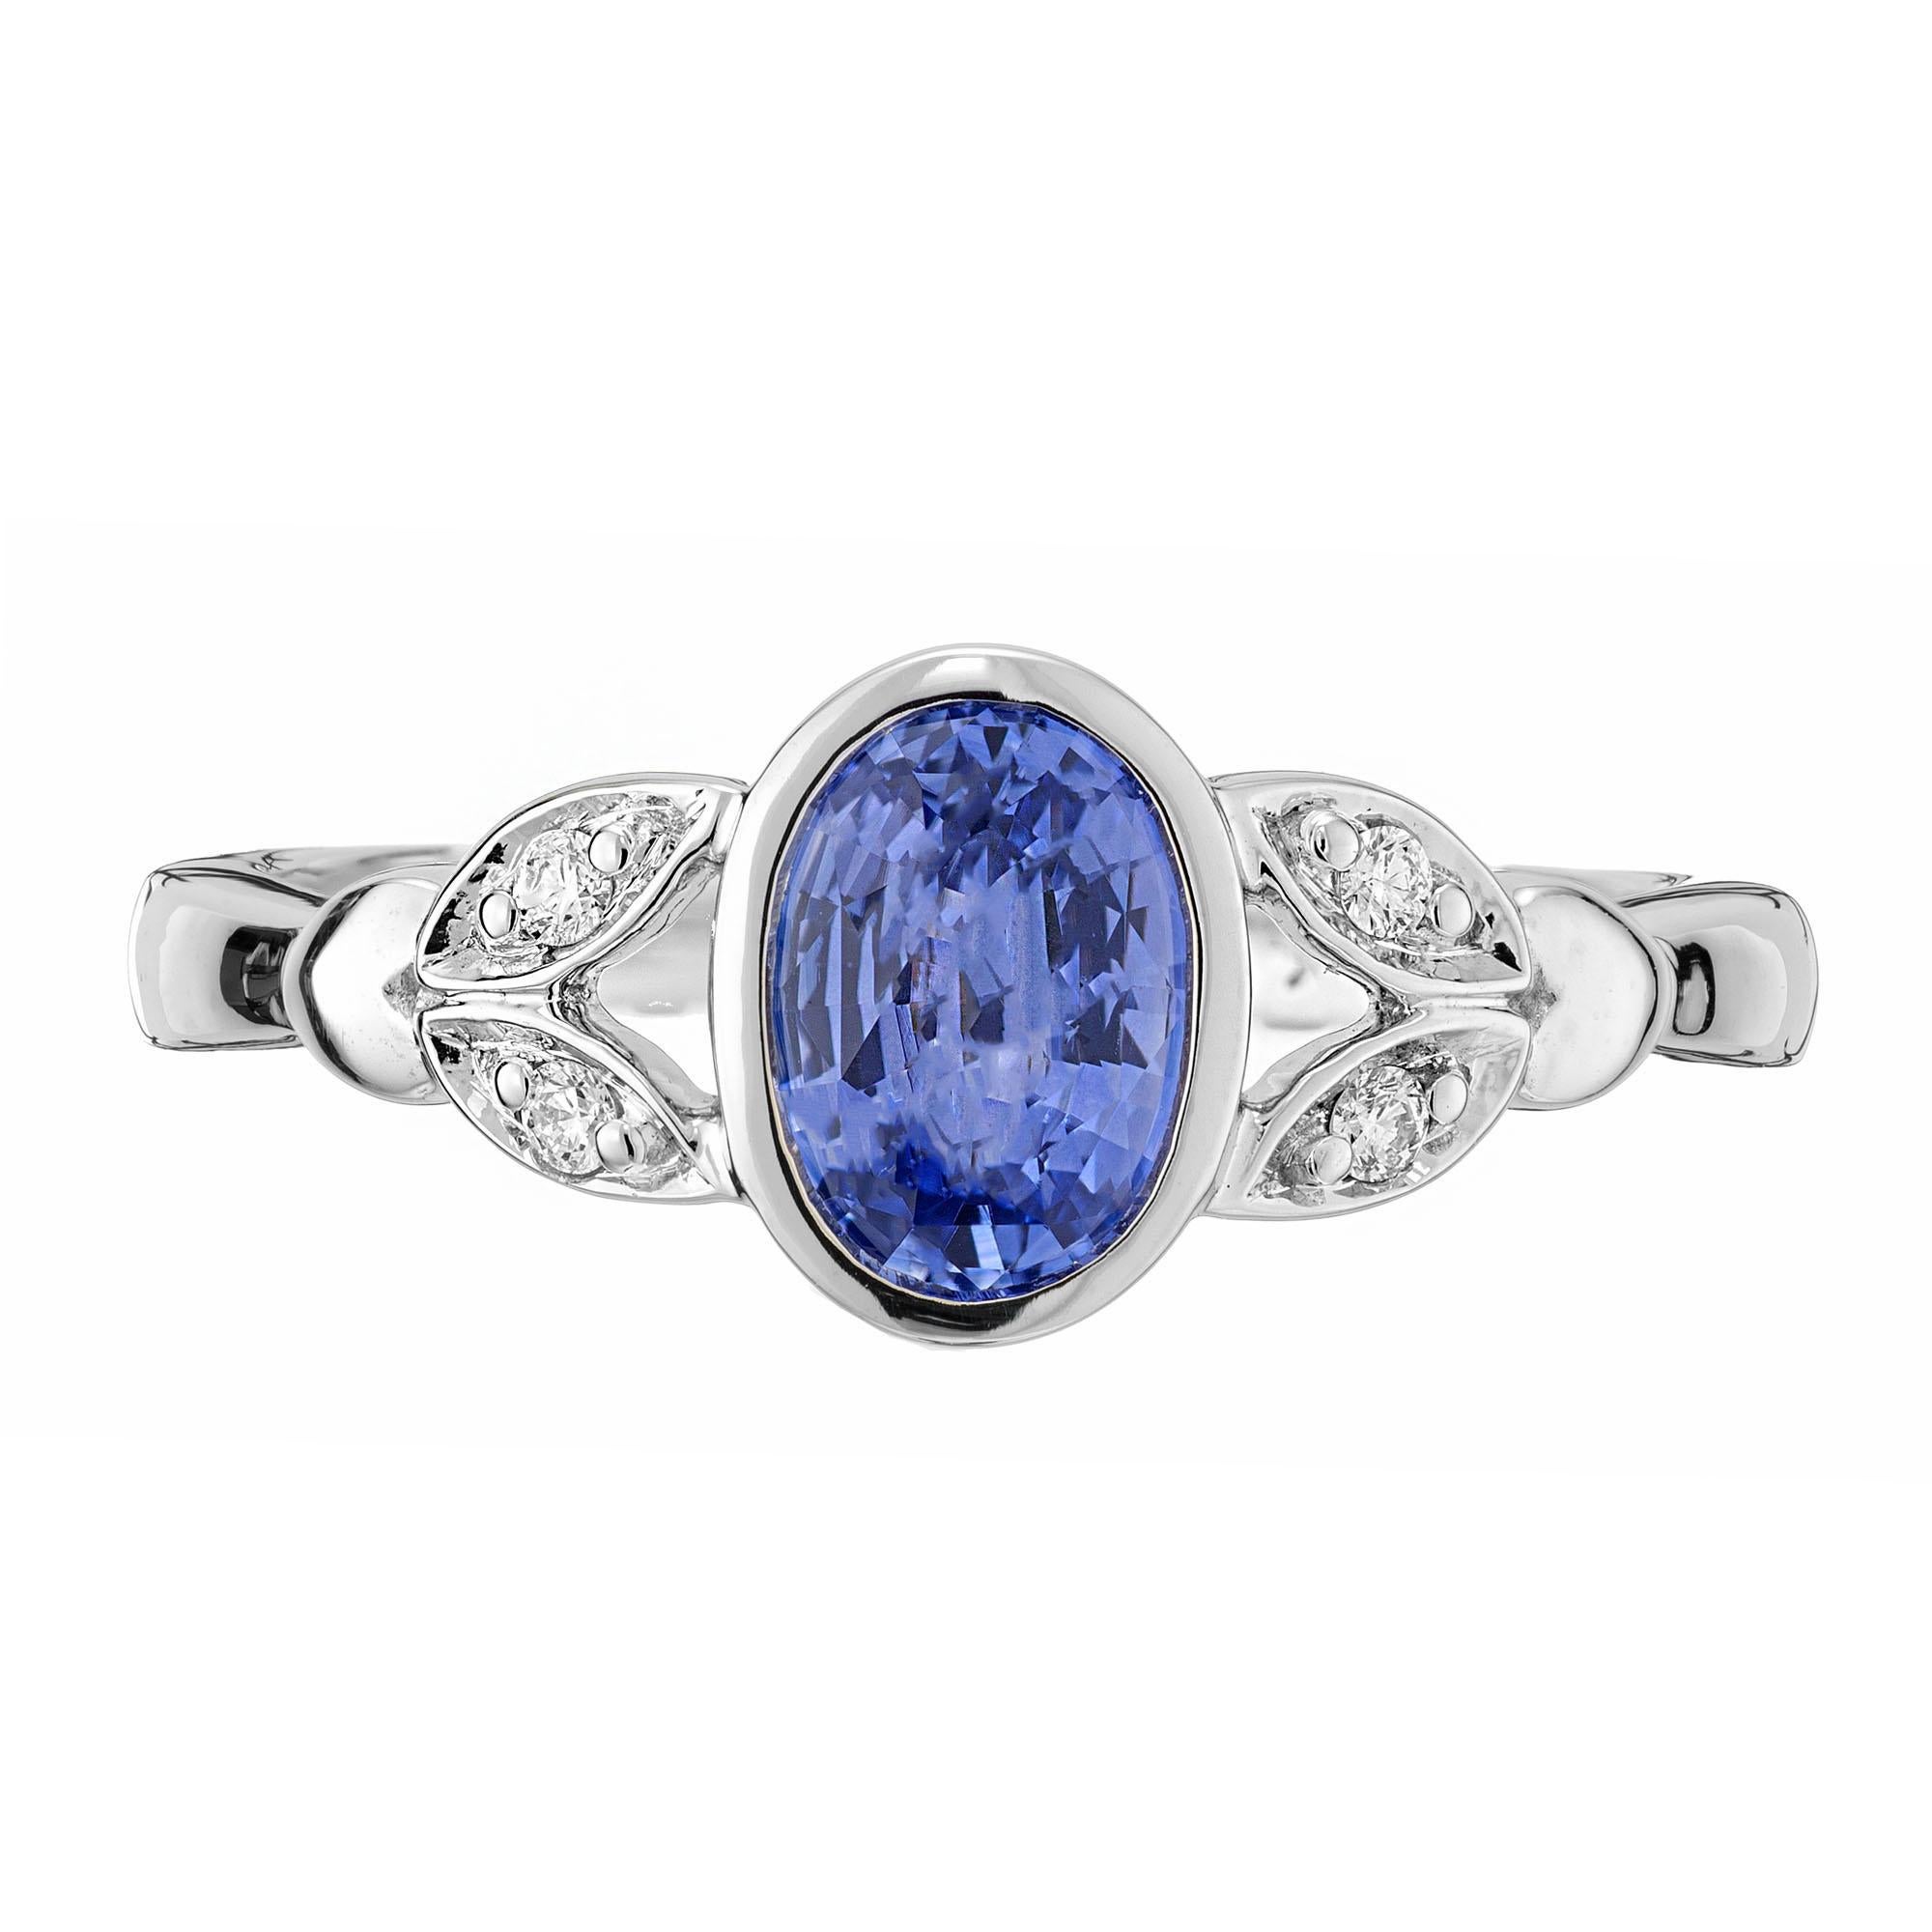 Natural oval blue sapphire and diamond engagement ring. Simple heat only, bezel set sapphire, with 4 round brilliant cut side diamonds. Designed and crafted in the Peter Suchy workshop.

1 oval blue sapphire, VS-SI approx. .93cts
4 round brilliant